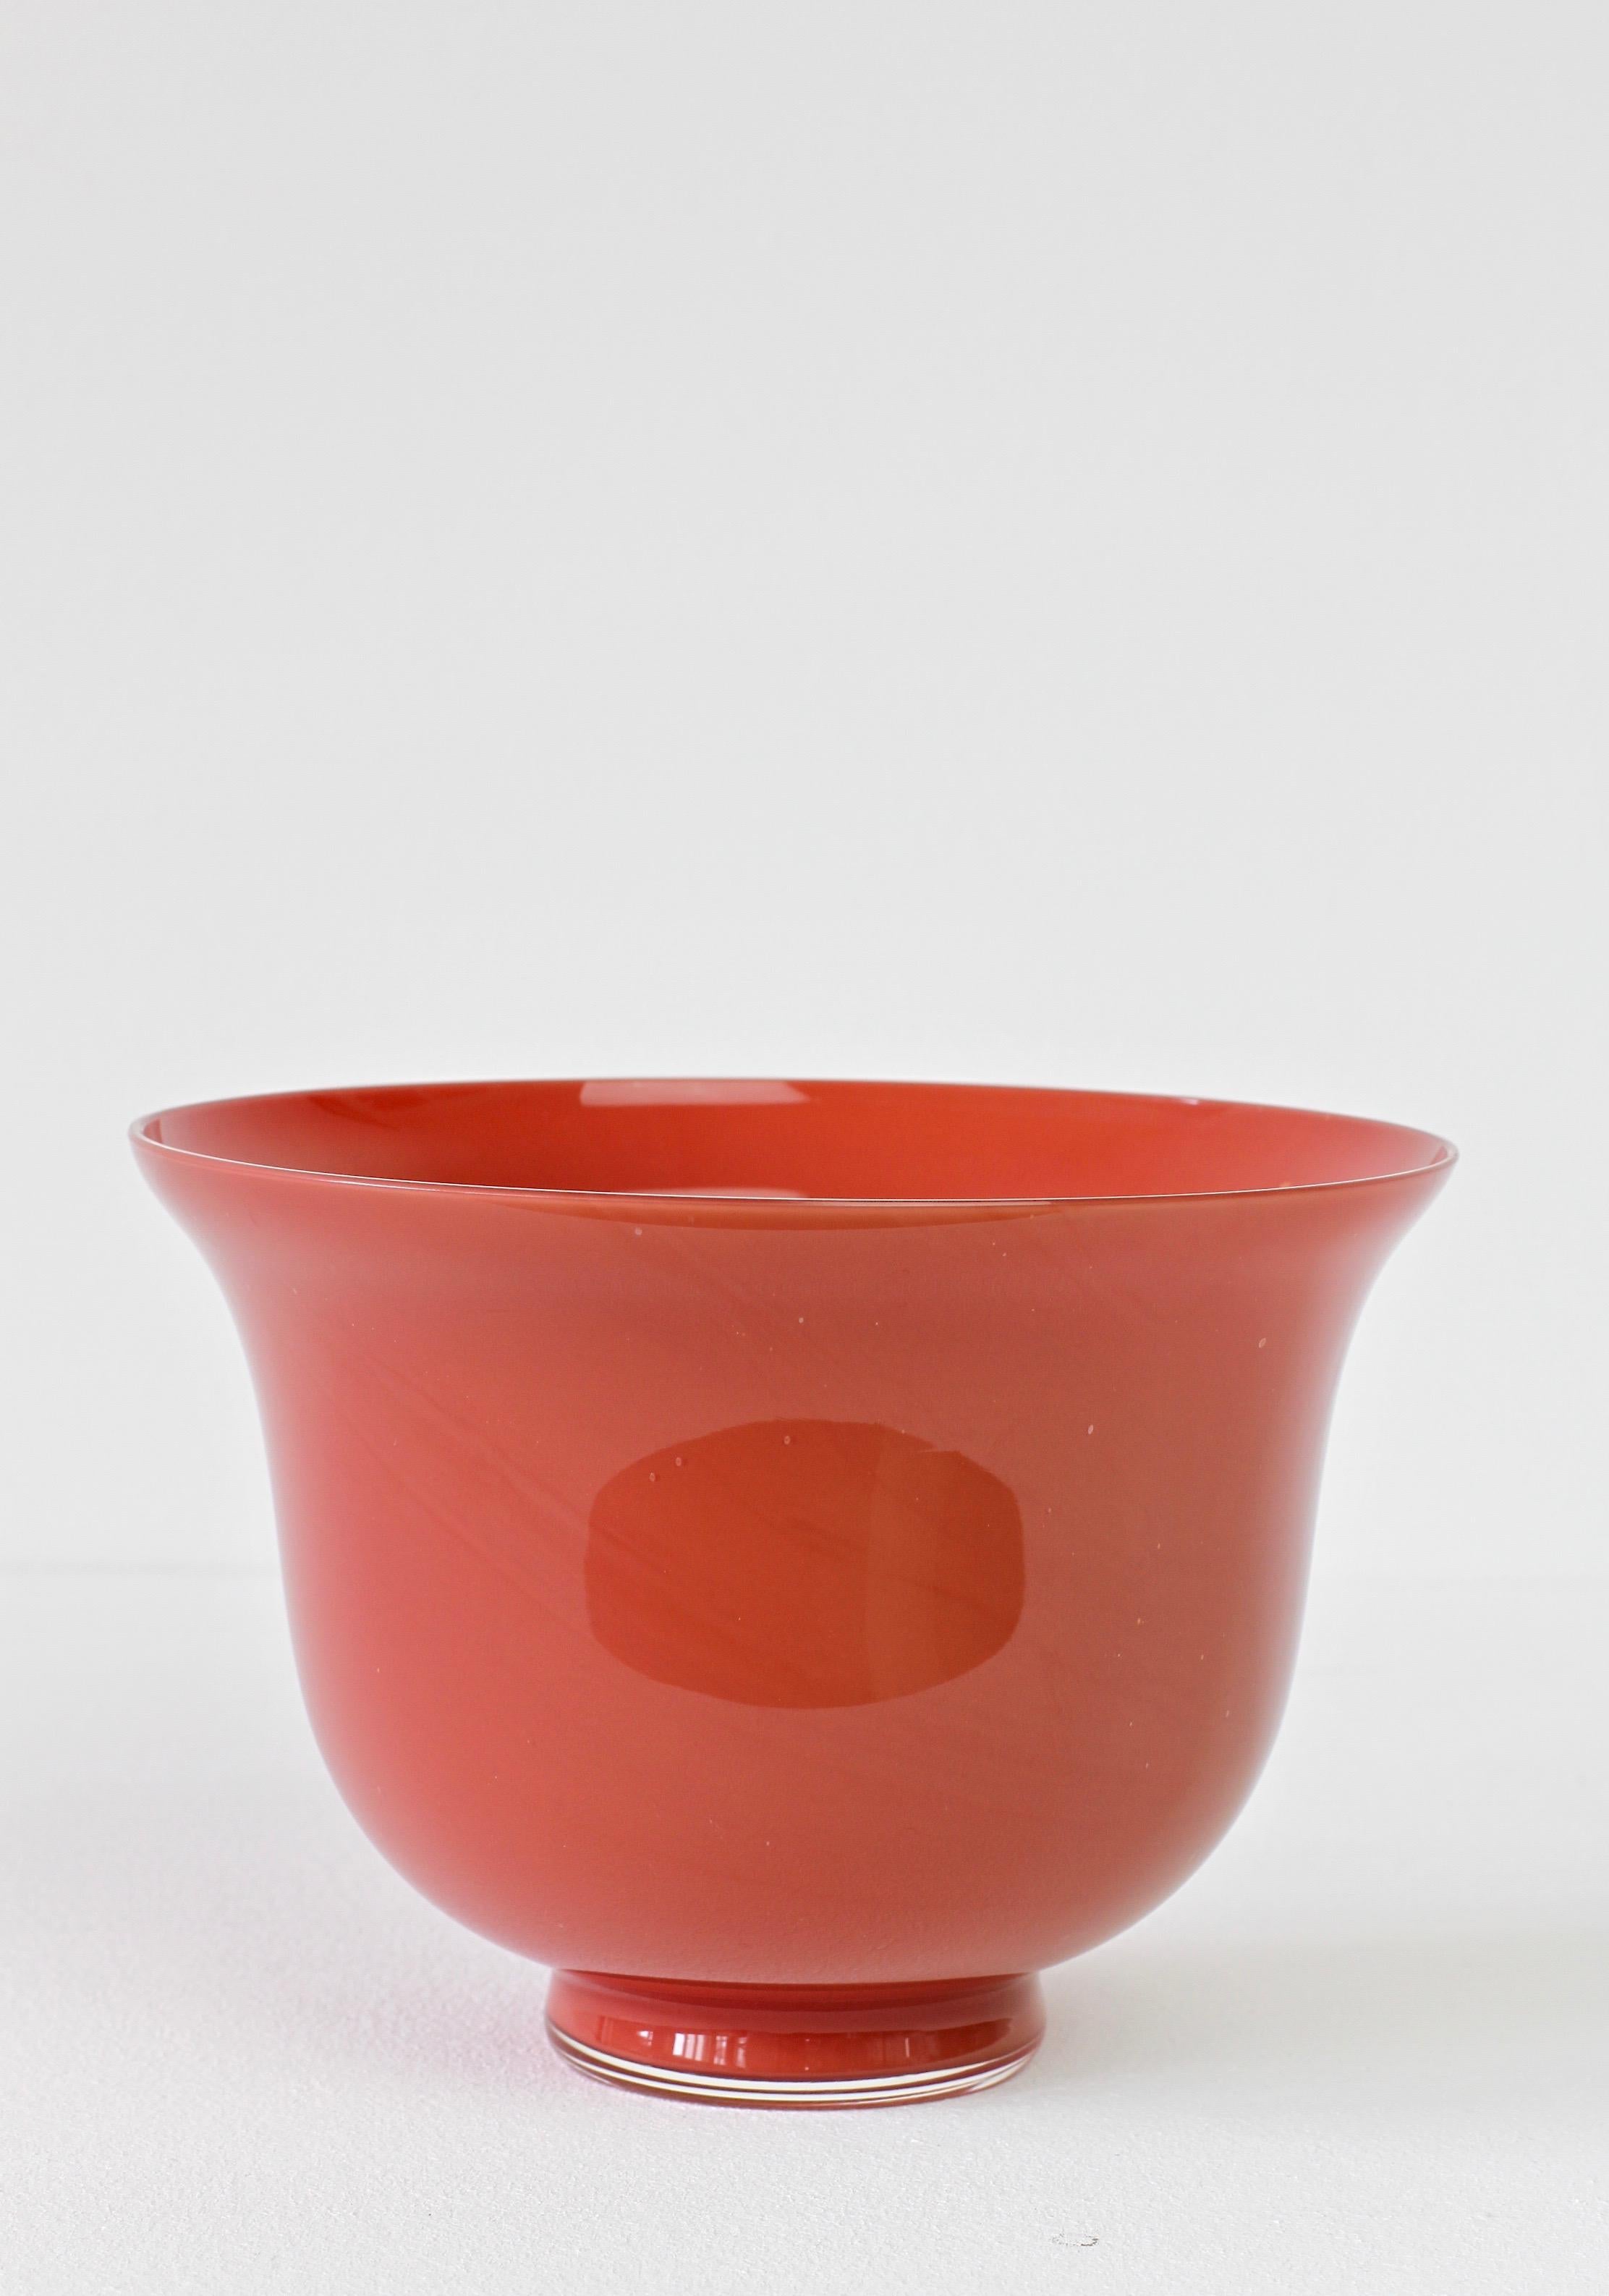 Midcentury vintage Cenedese Vetri of Murano, Italy. Particularly striking is the vessel's elegant form and dark red color (colour).

We have a full range of Murano glass from Cenedese - including bowls, vases, vessels & ashtrays - in various colours